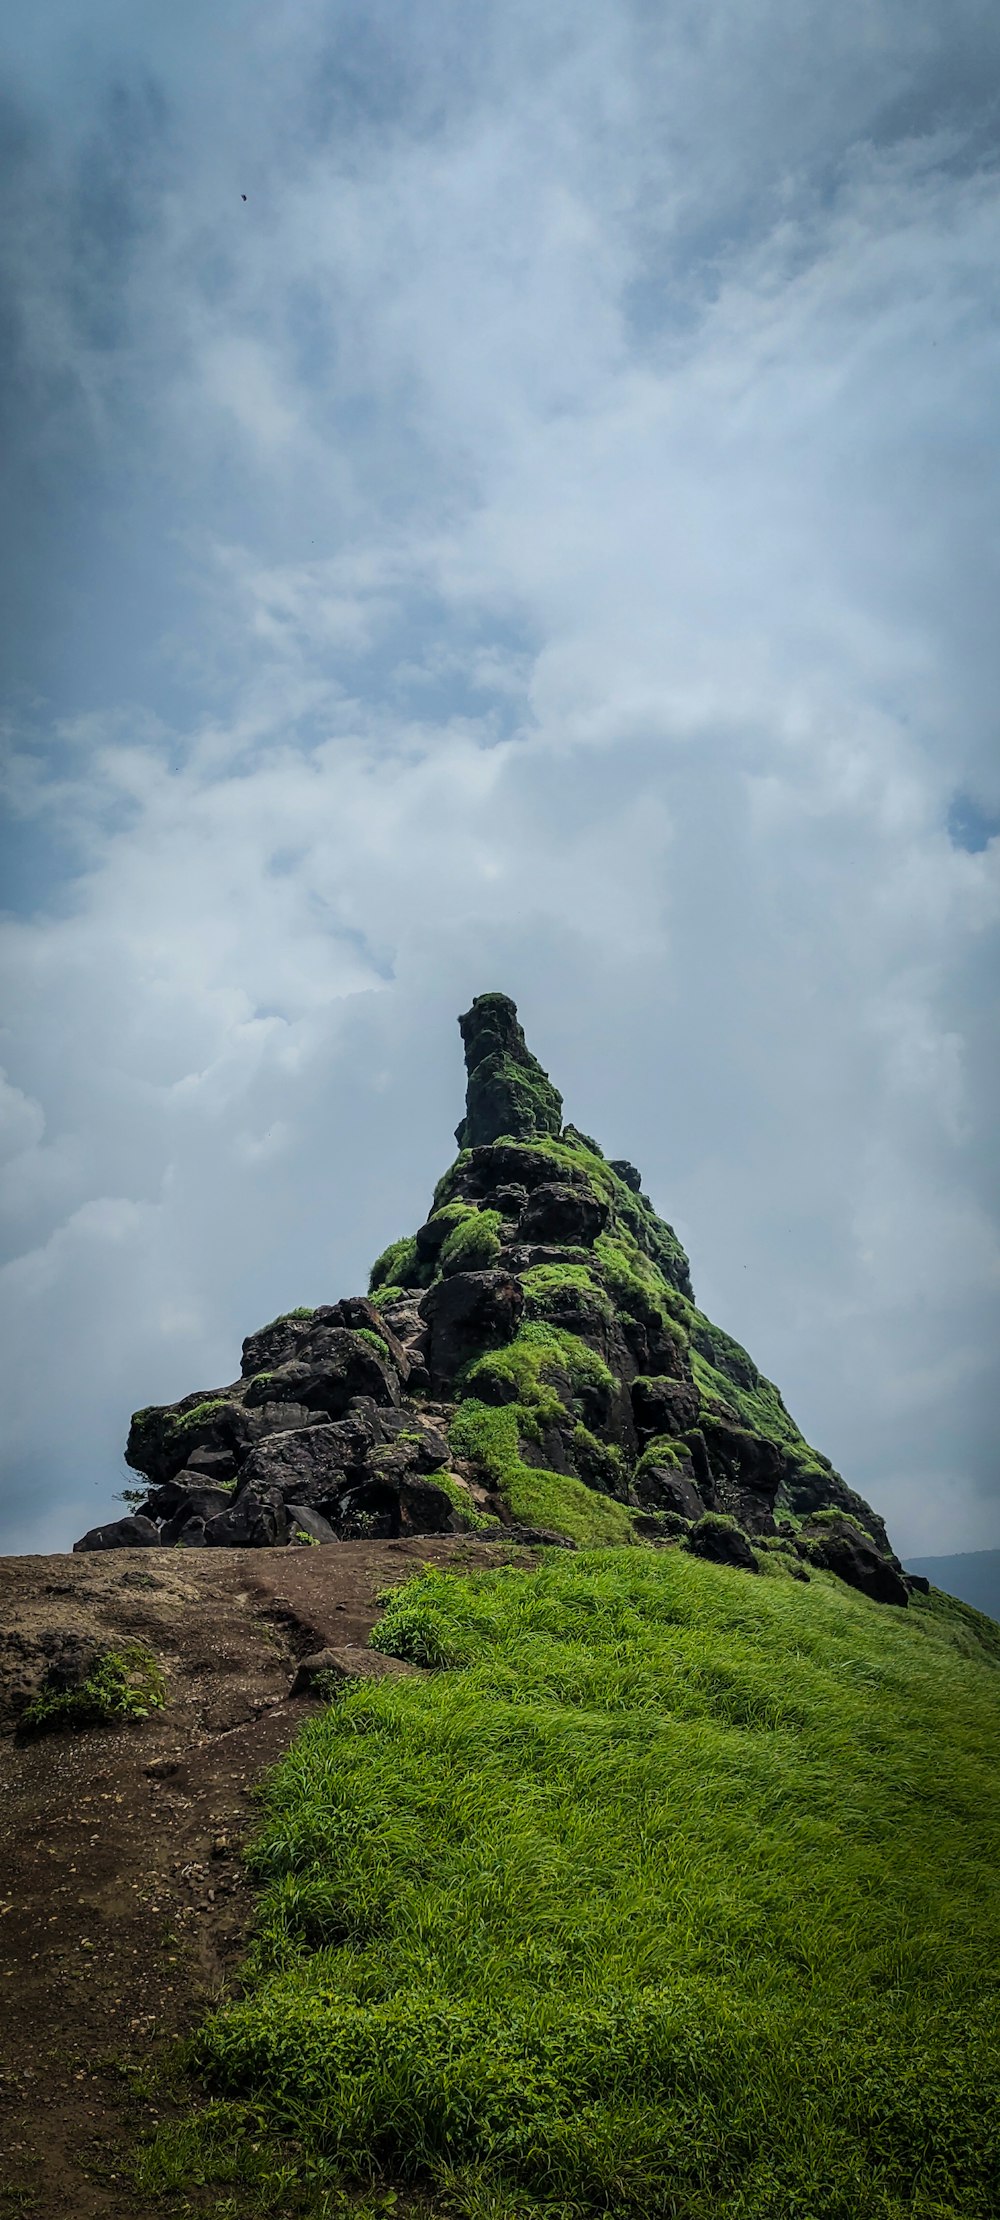 a large rock formation on top of a grassy hill